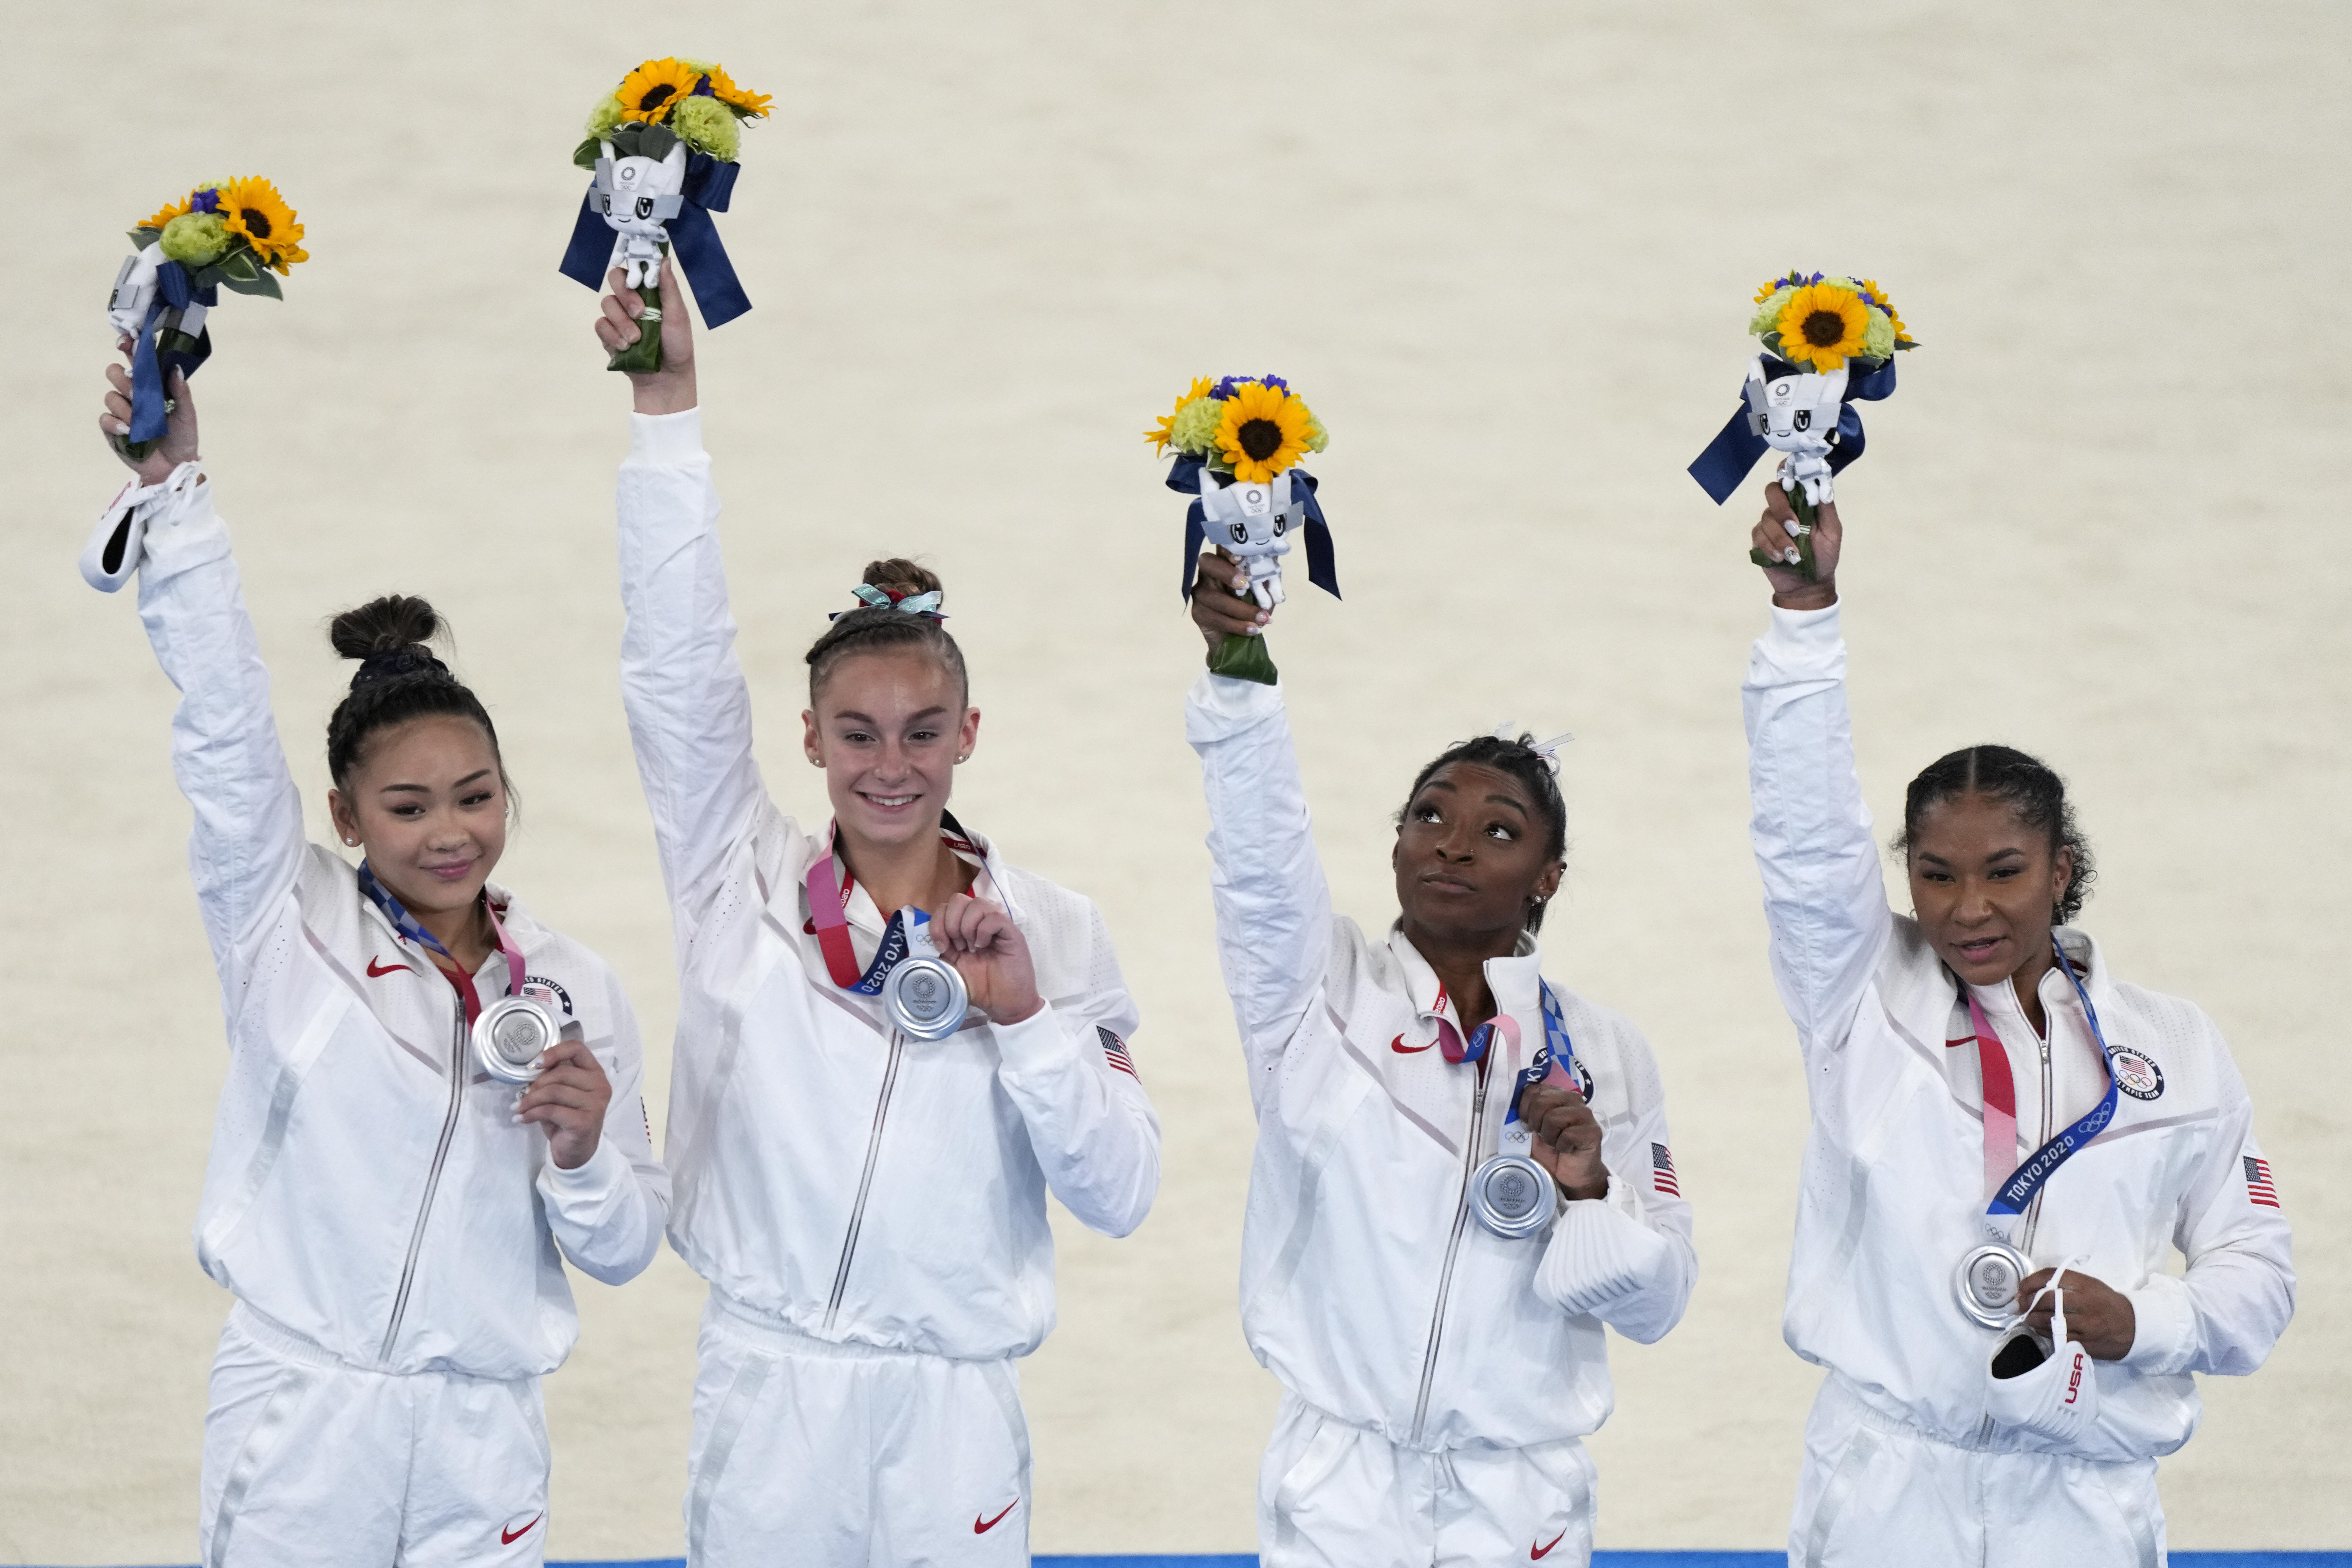 Gymnastics-Russia Olympic Committee win women's team gold